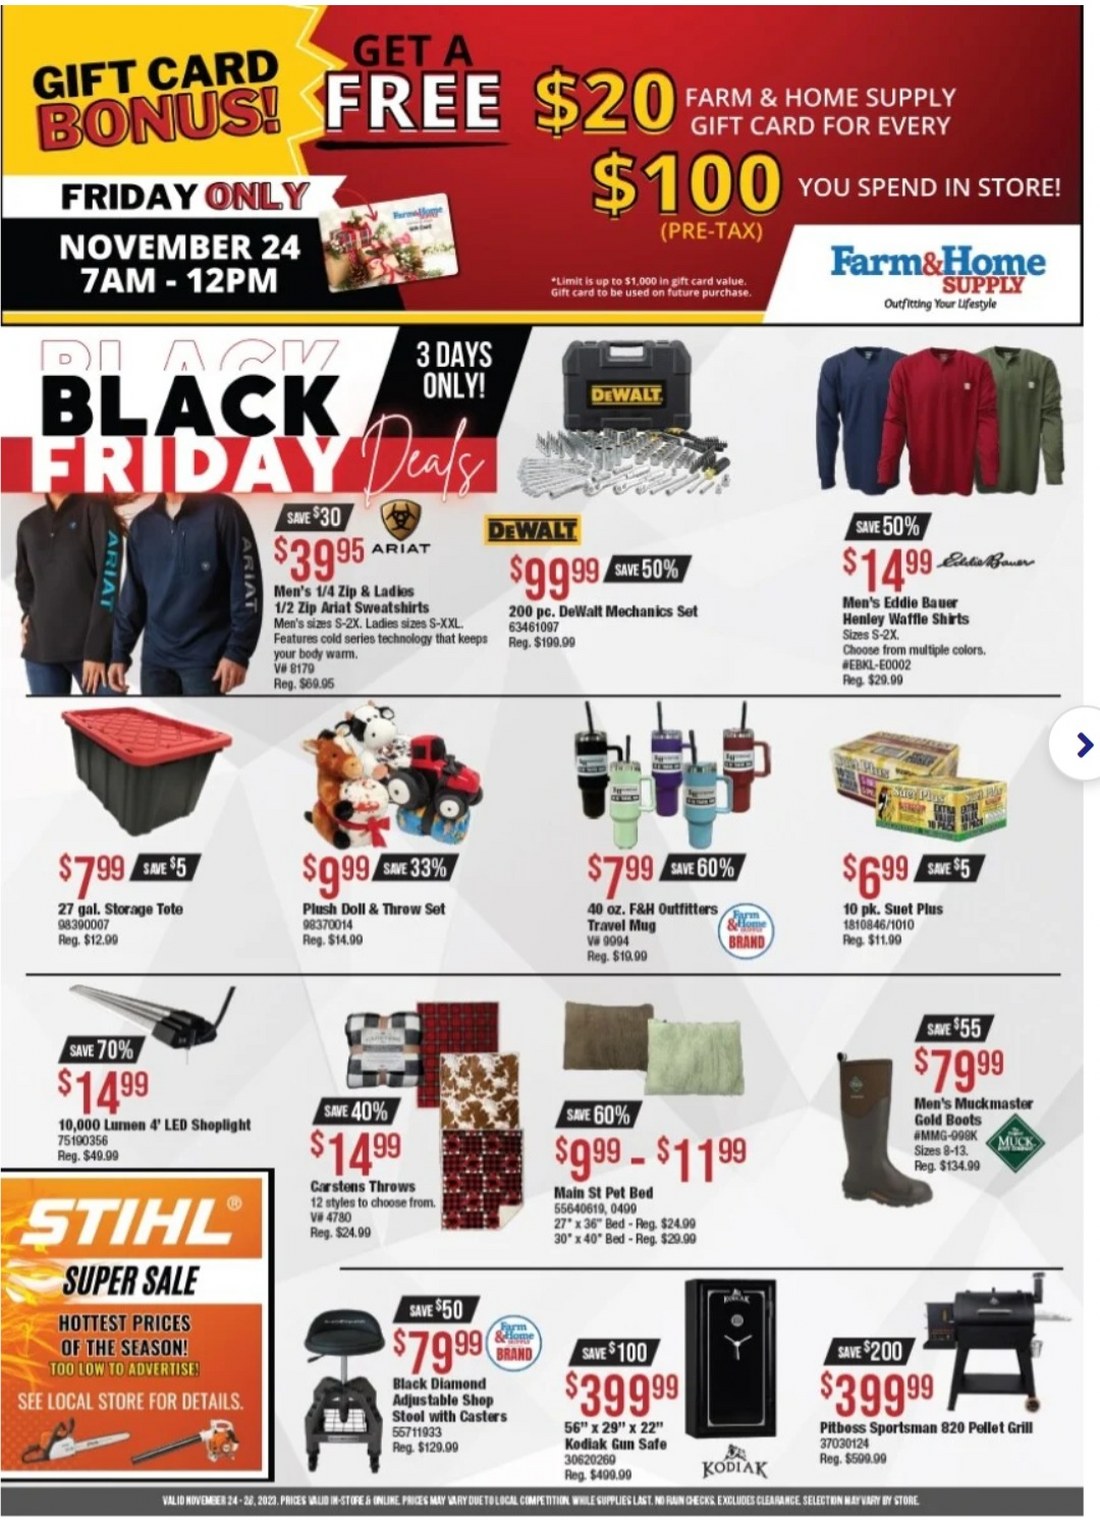 Farm and Home Supply July 2024 Weekly Sales, Deals, Discounts and Digital Coupons.